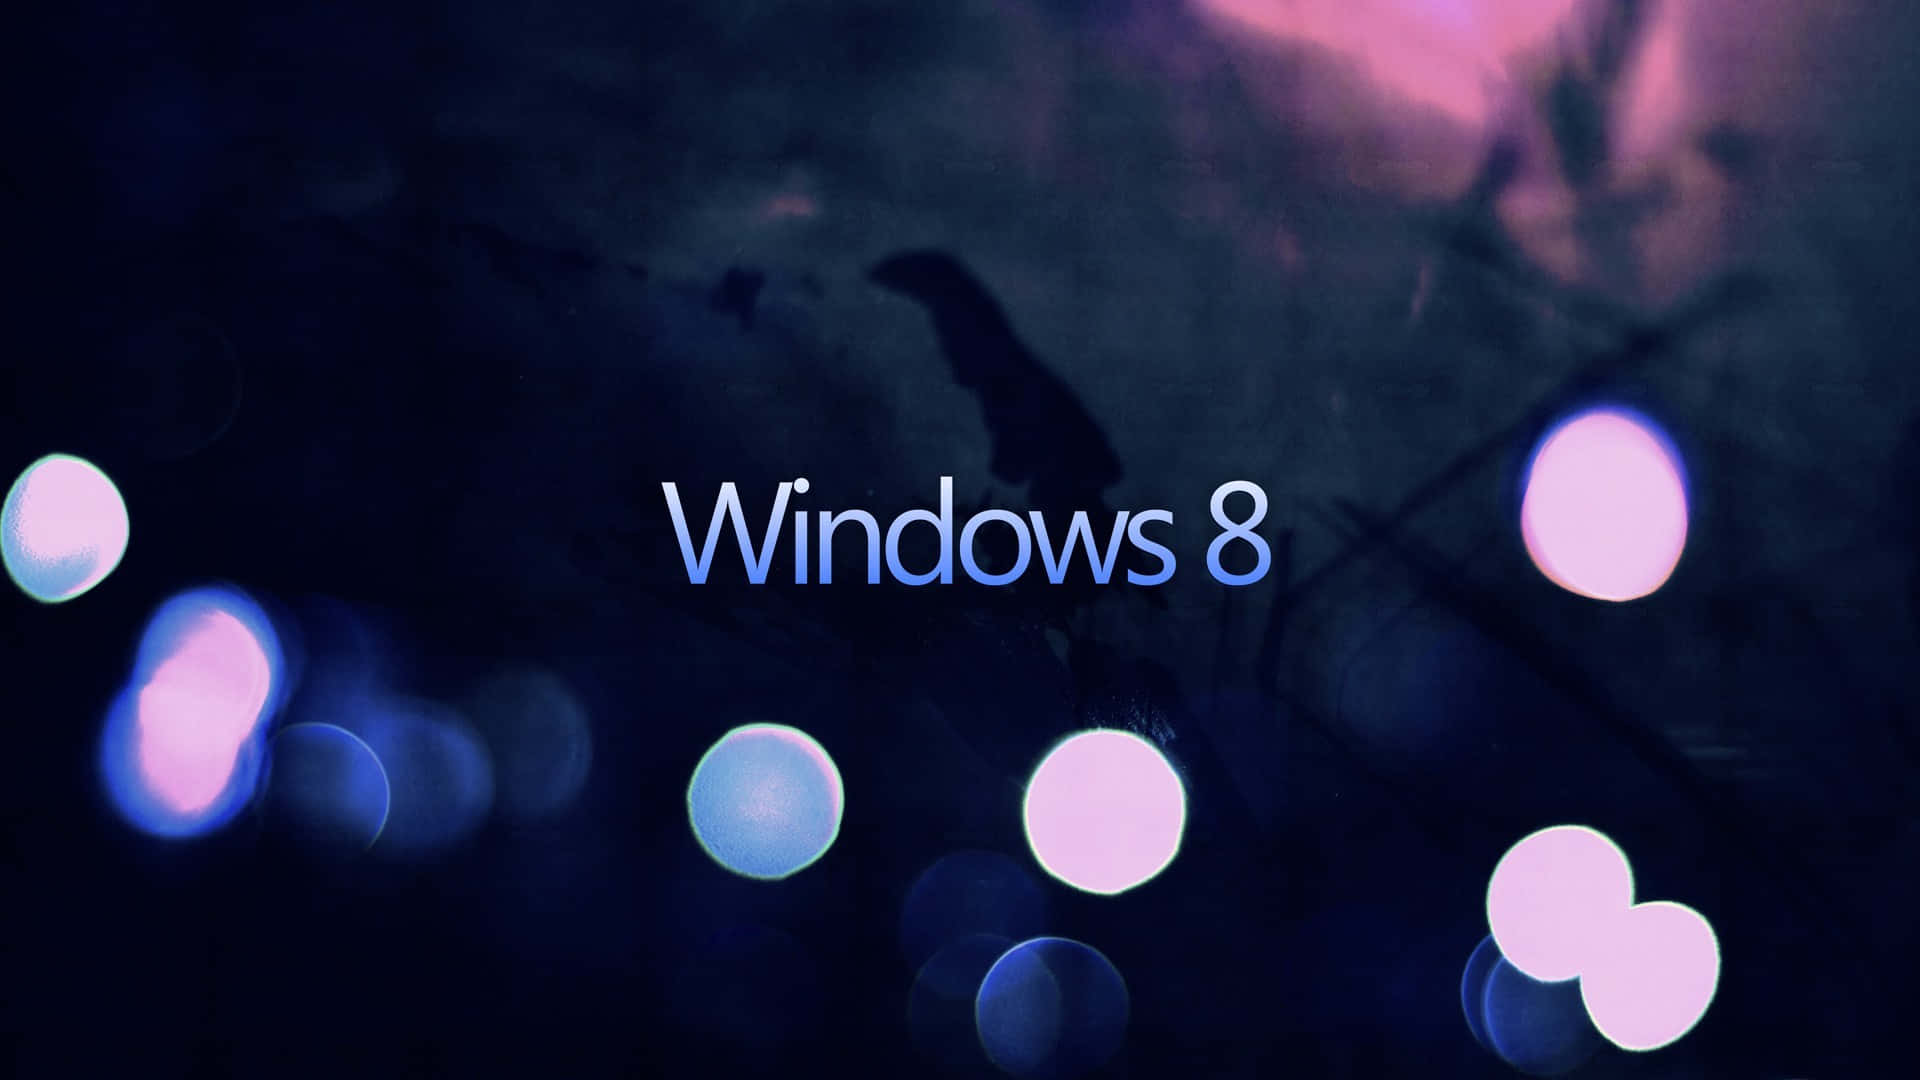 Windows 8 Abstract Background Wallpaper